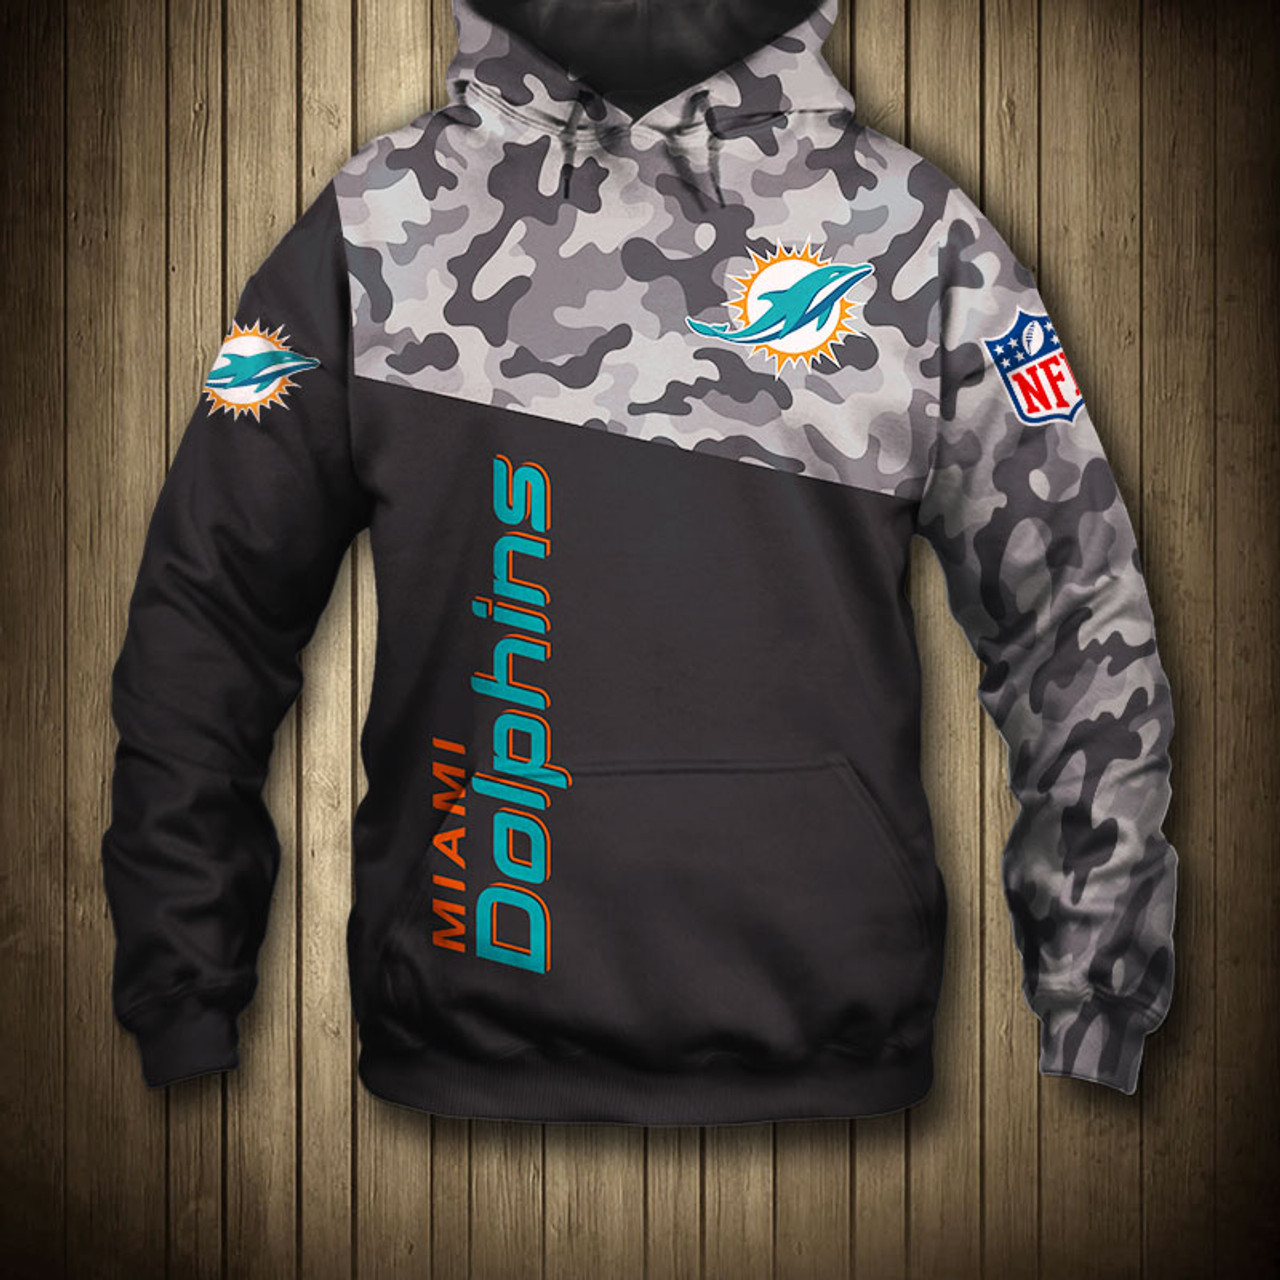 miami dolphins pullover hoodie